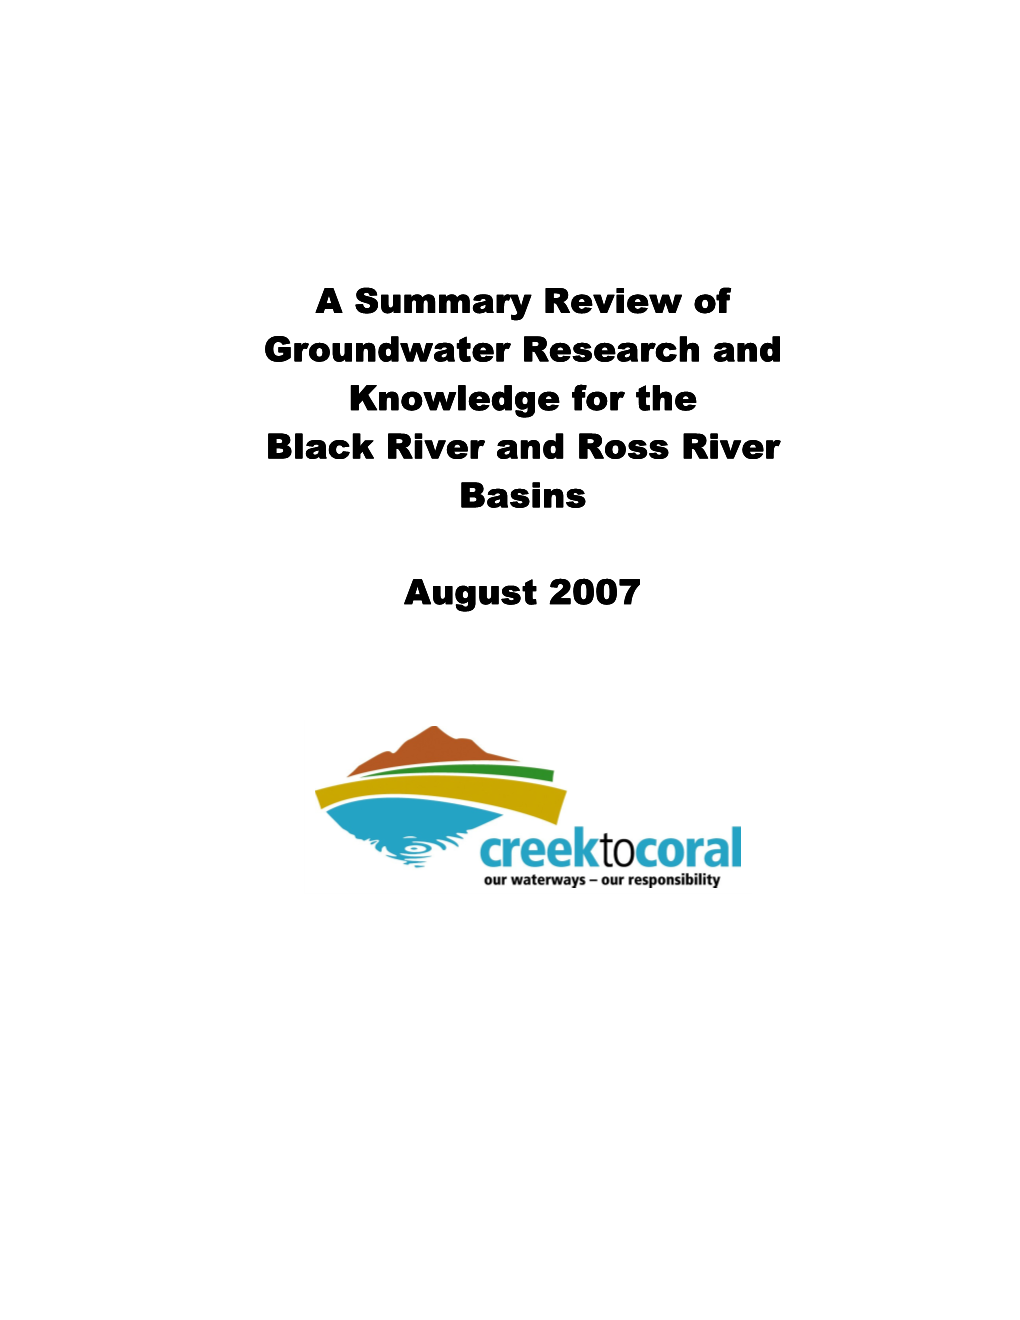 Groundwater Information Review